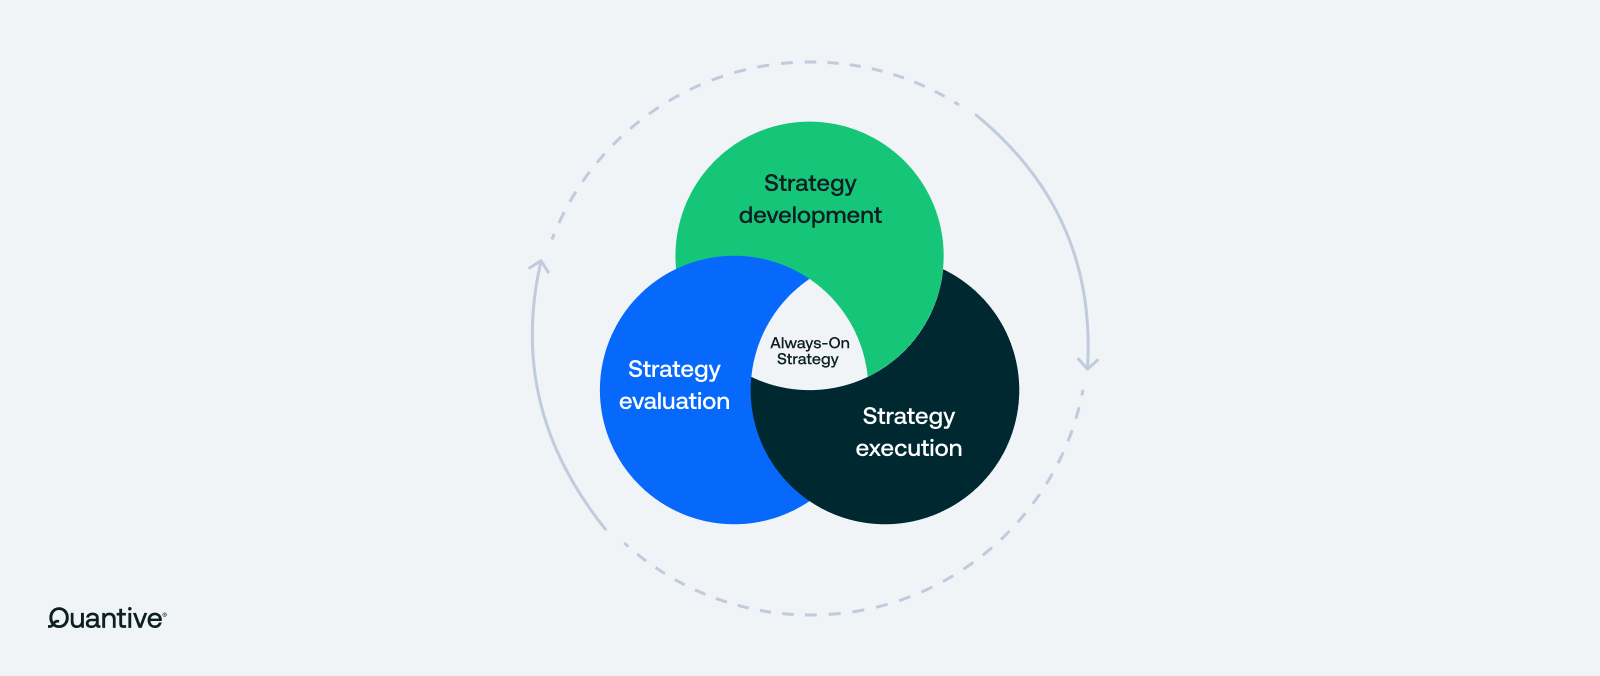 an image showing the three components of the always-on strategy model